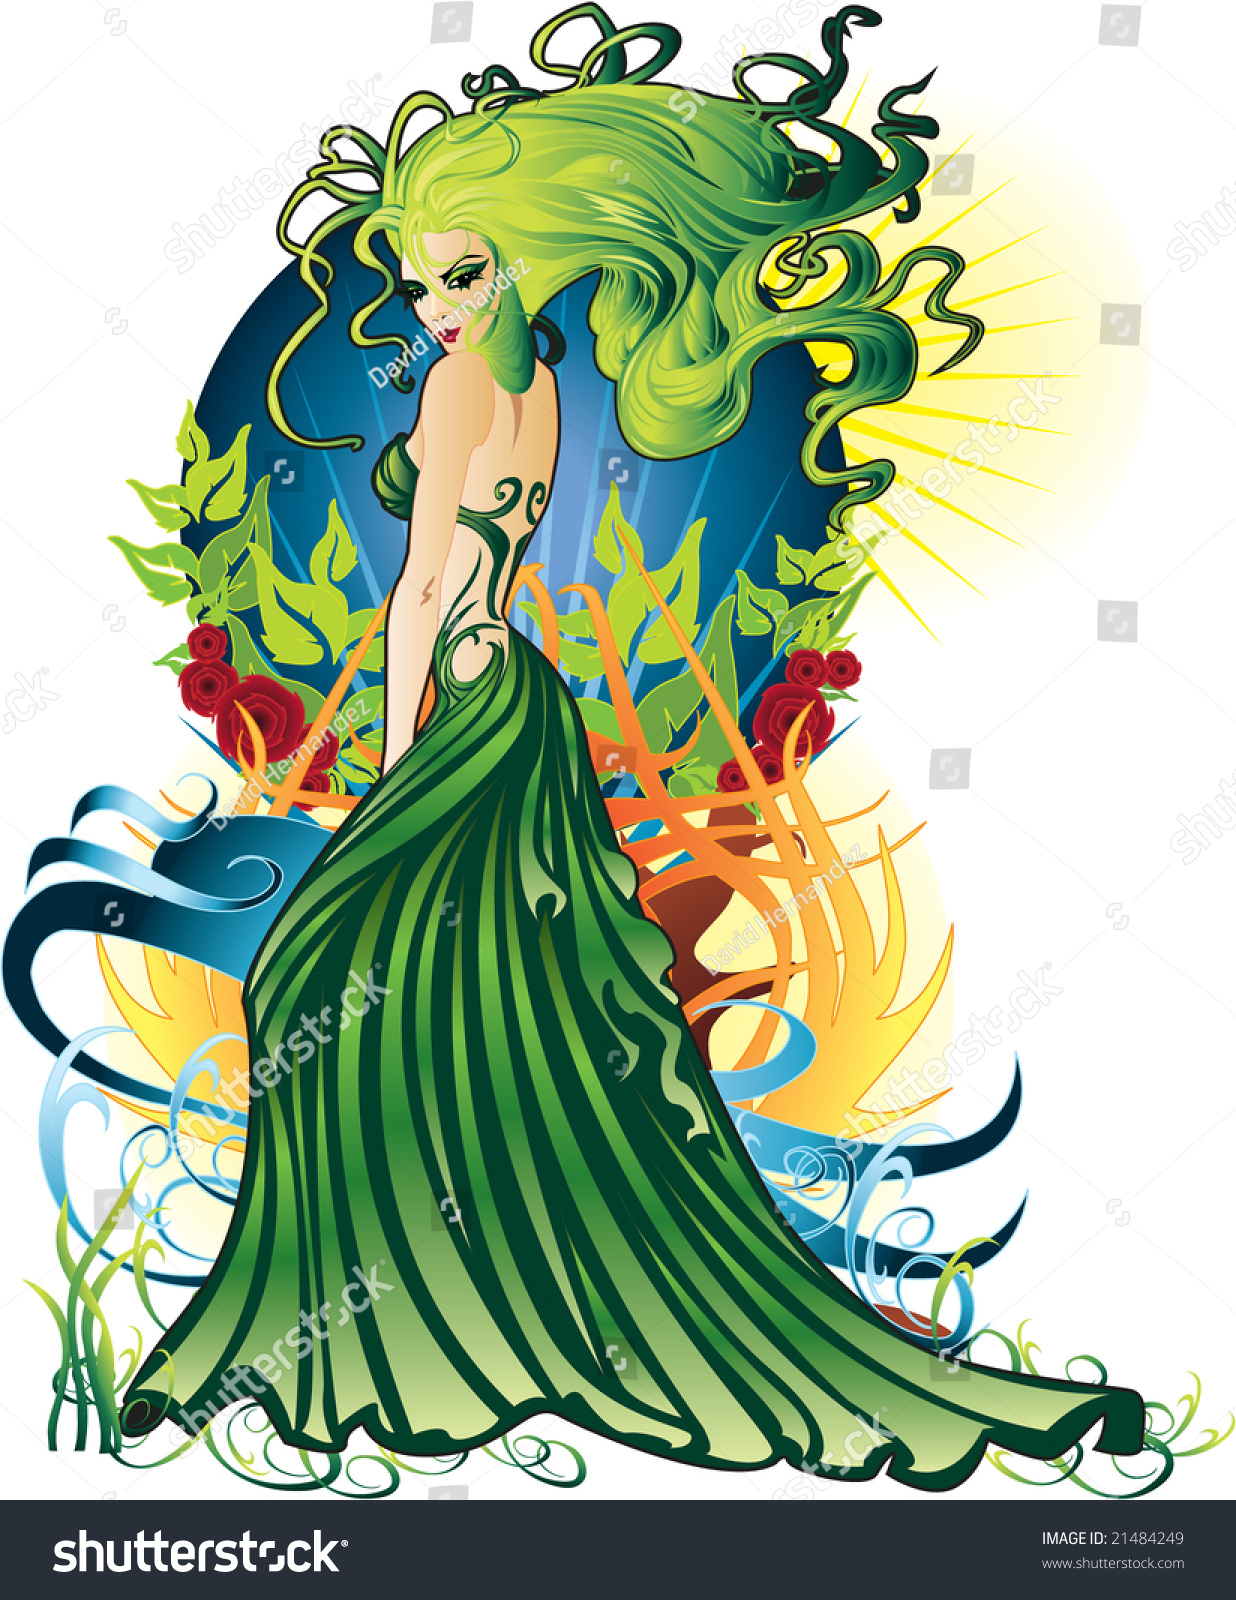 mother nature clipart - photo #15